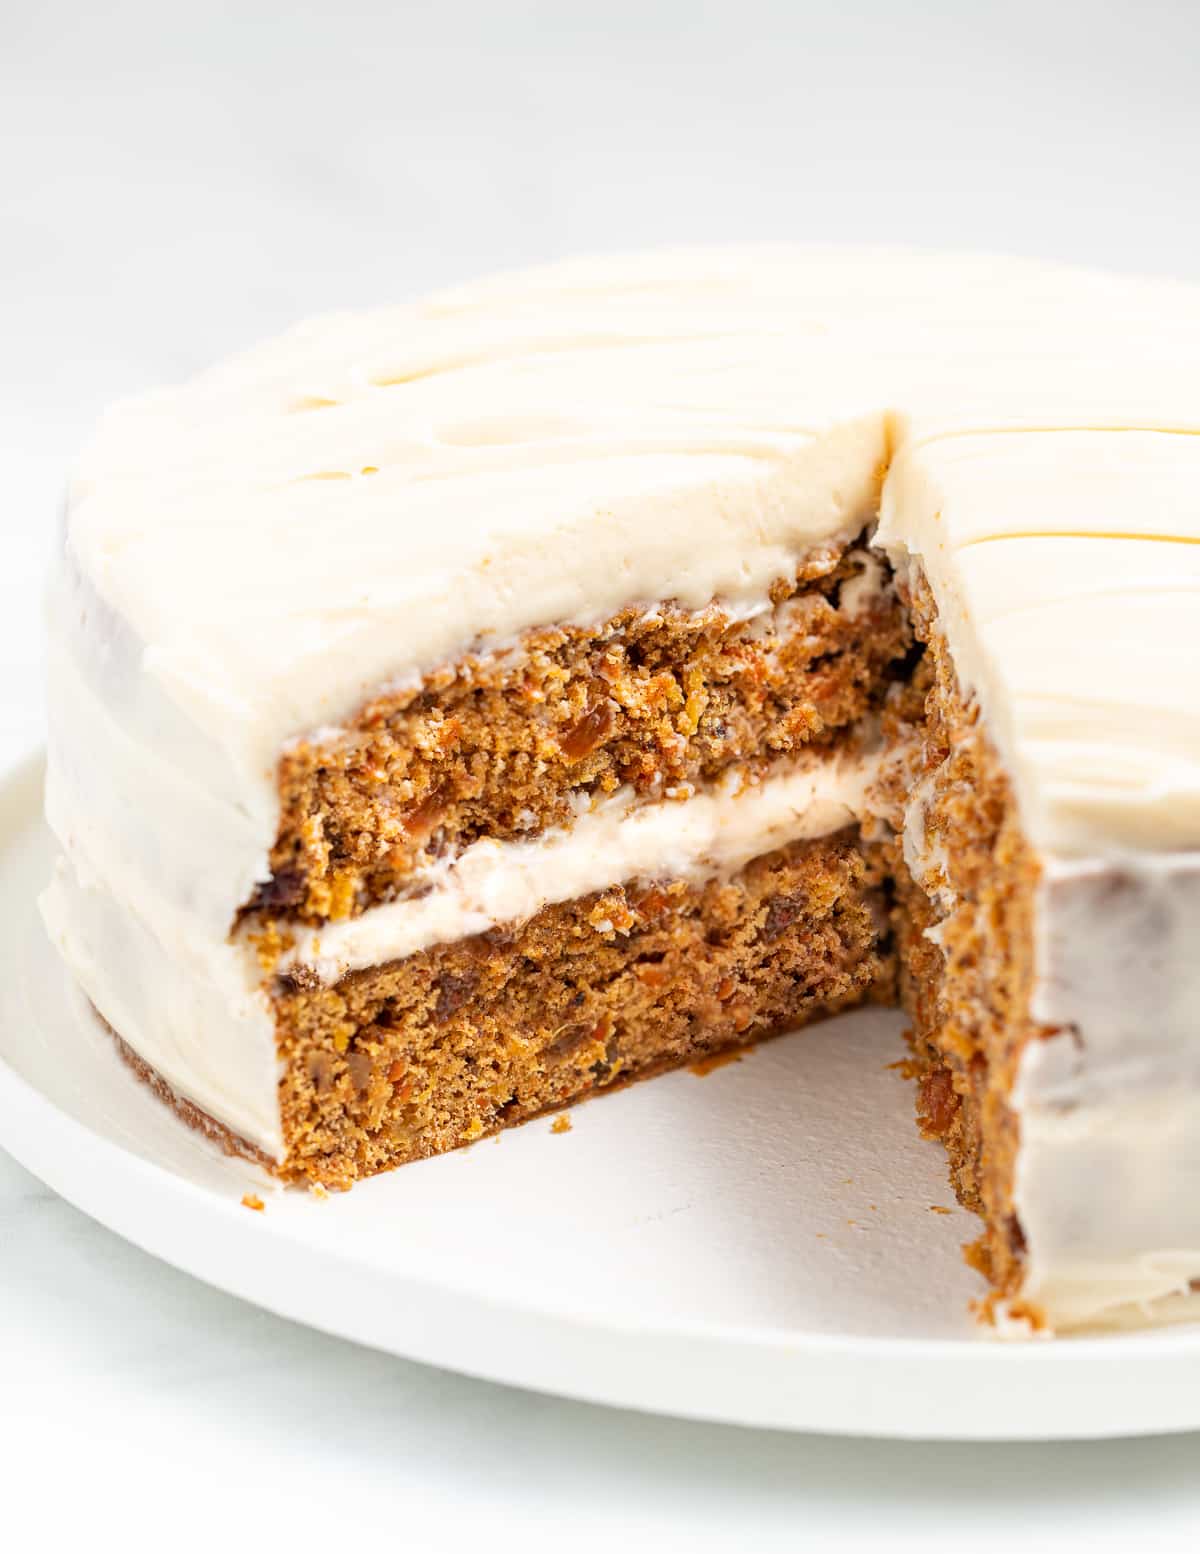 a vegan carrot cake on a plate with one slice cut out, inside showing